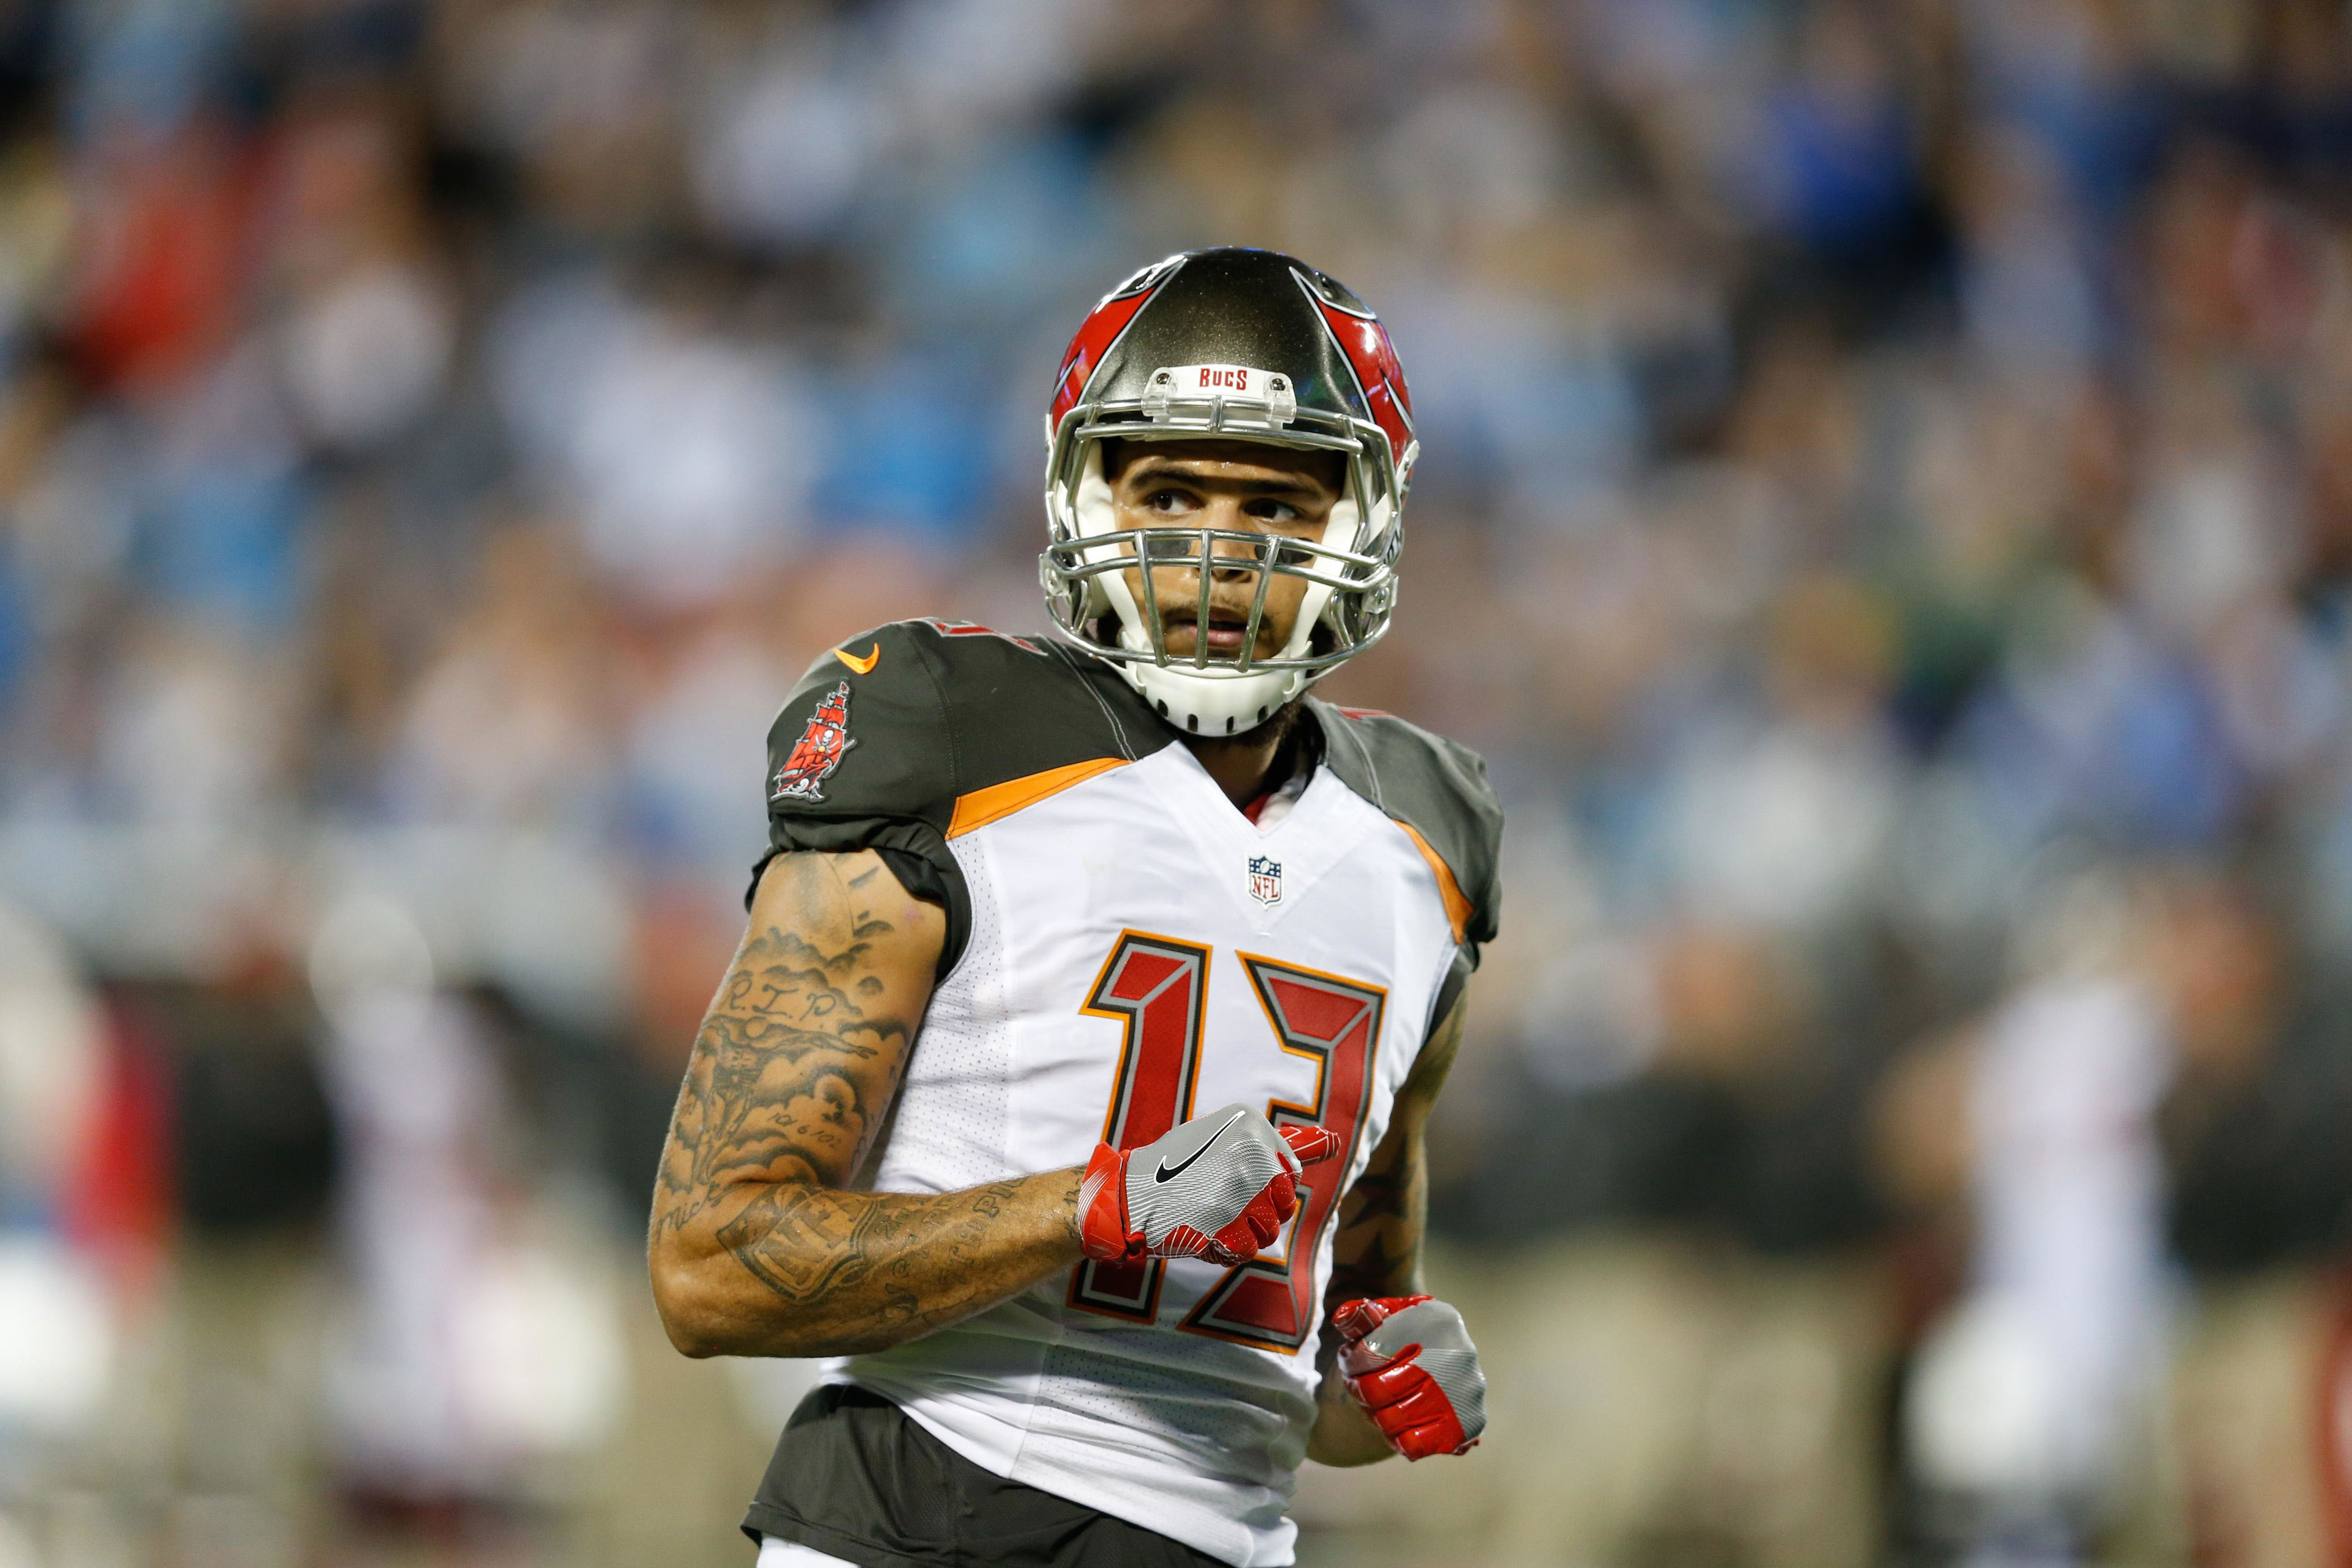 report: giants were prepared to pursue mike evans in free agency